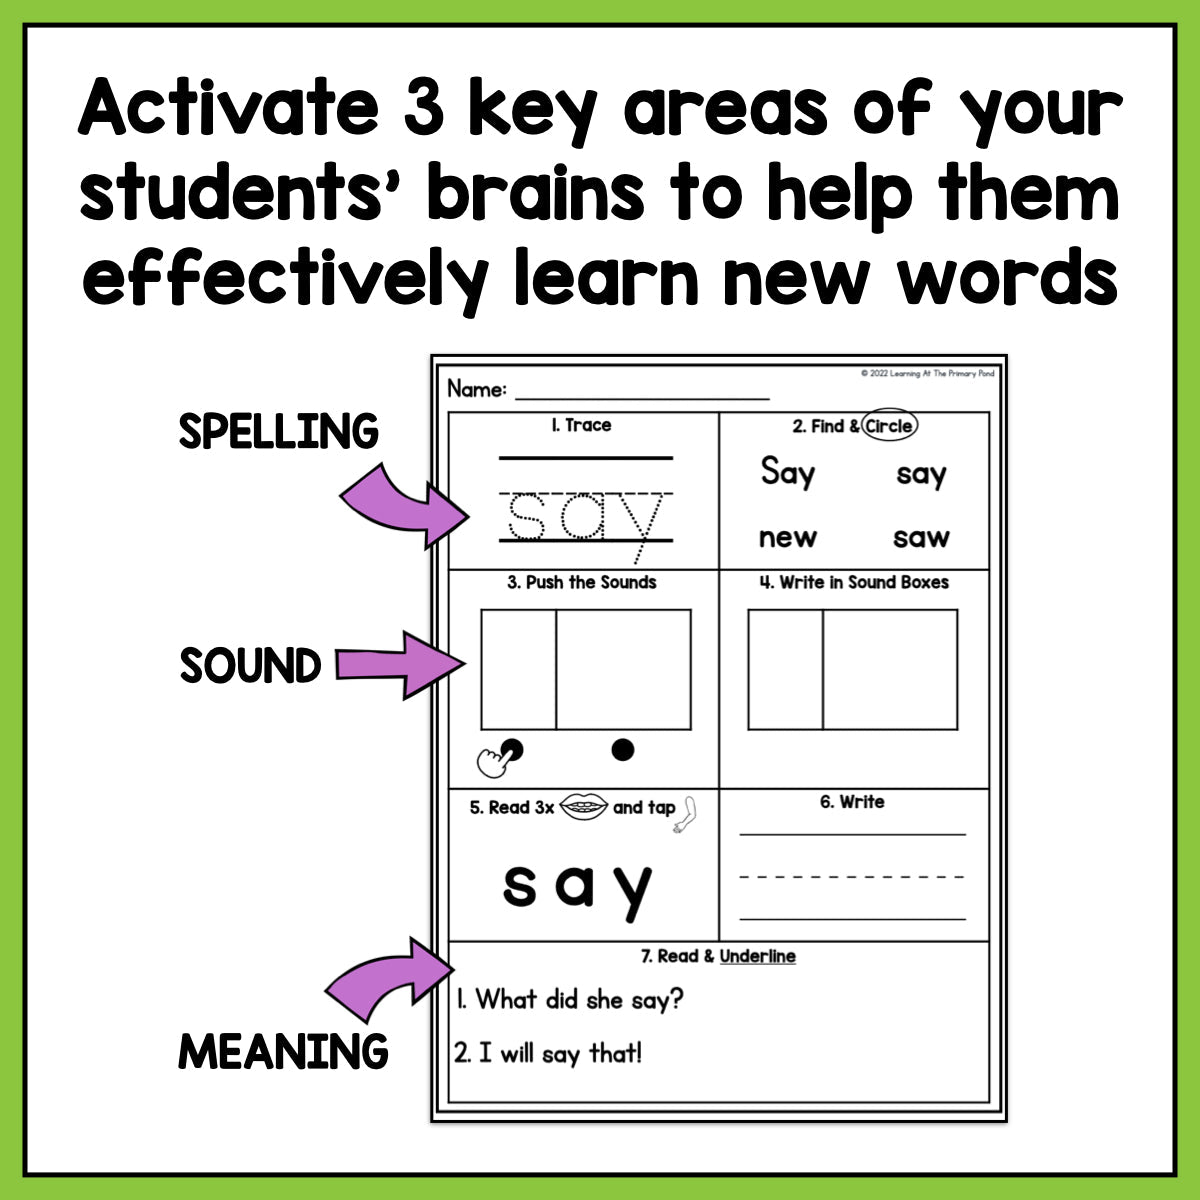 High Frequency Word Worksheets | Dolch Sight Word List Primer - learning-at-the-primary-pond